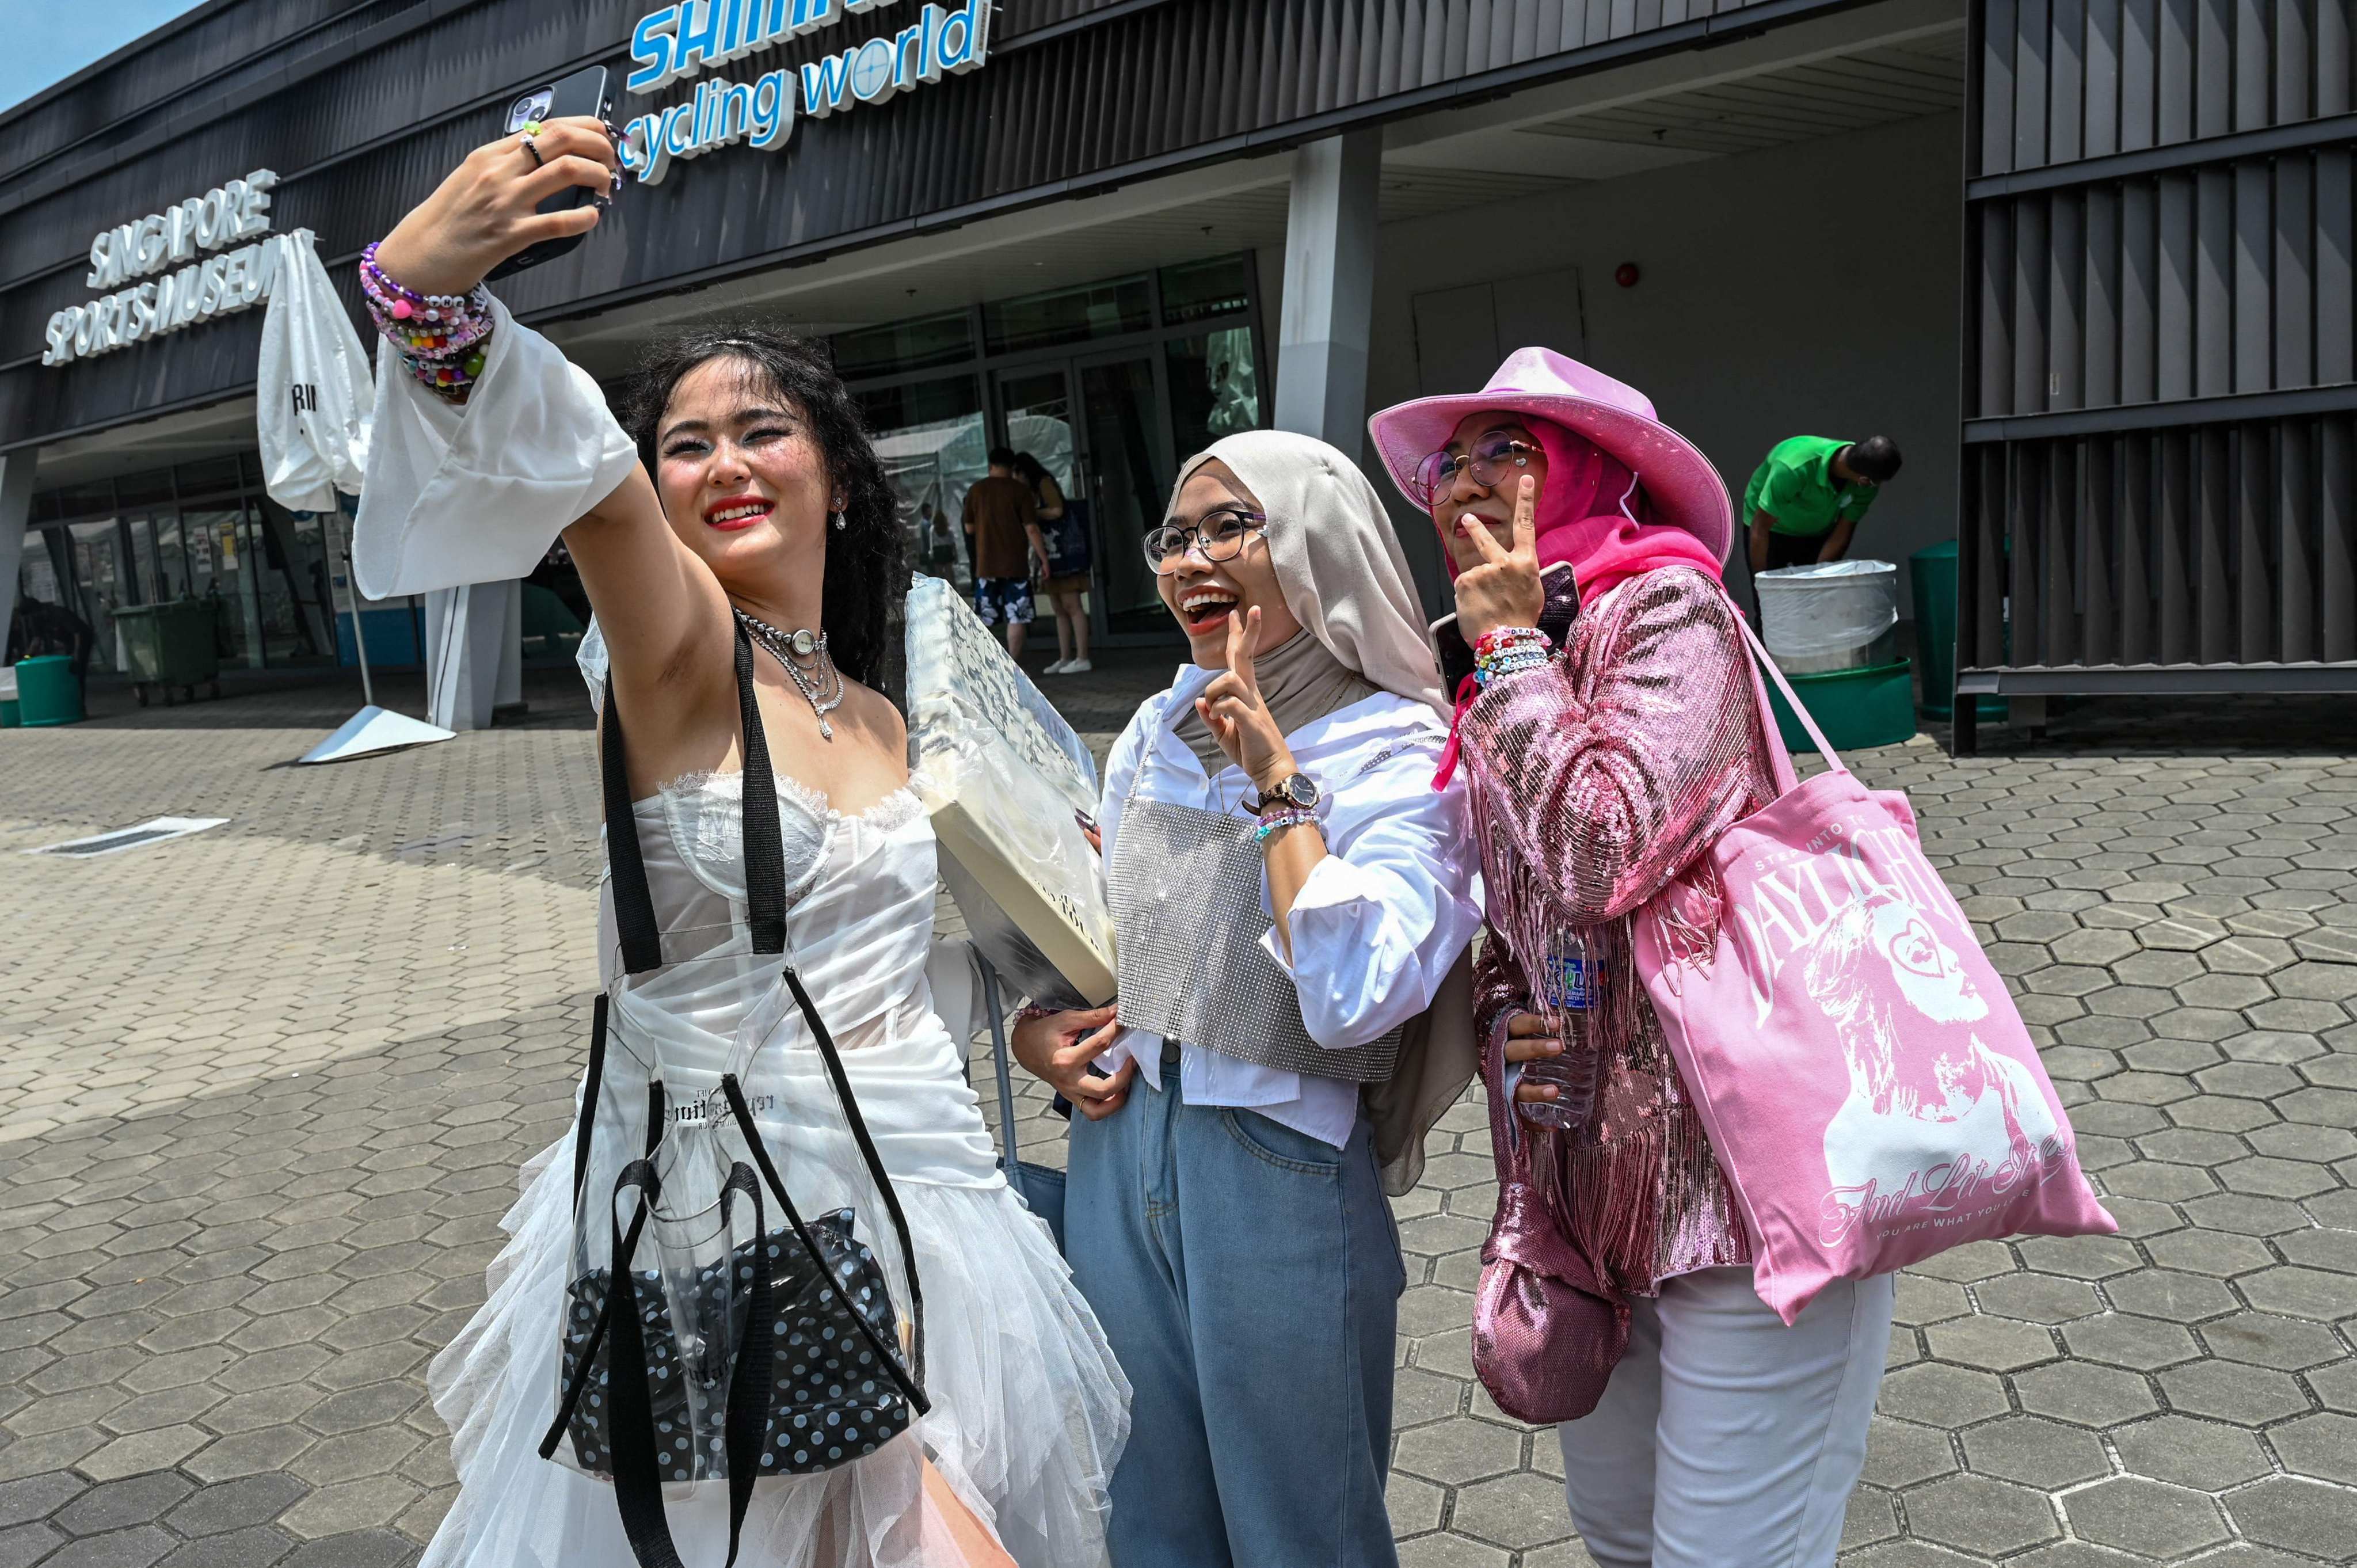 Fans of US singer Taylor Swift take a selfie as they arrive for her concert at the National Stadium in Singapore on March 7. Photo: AFP